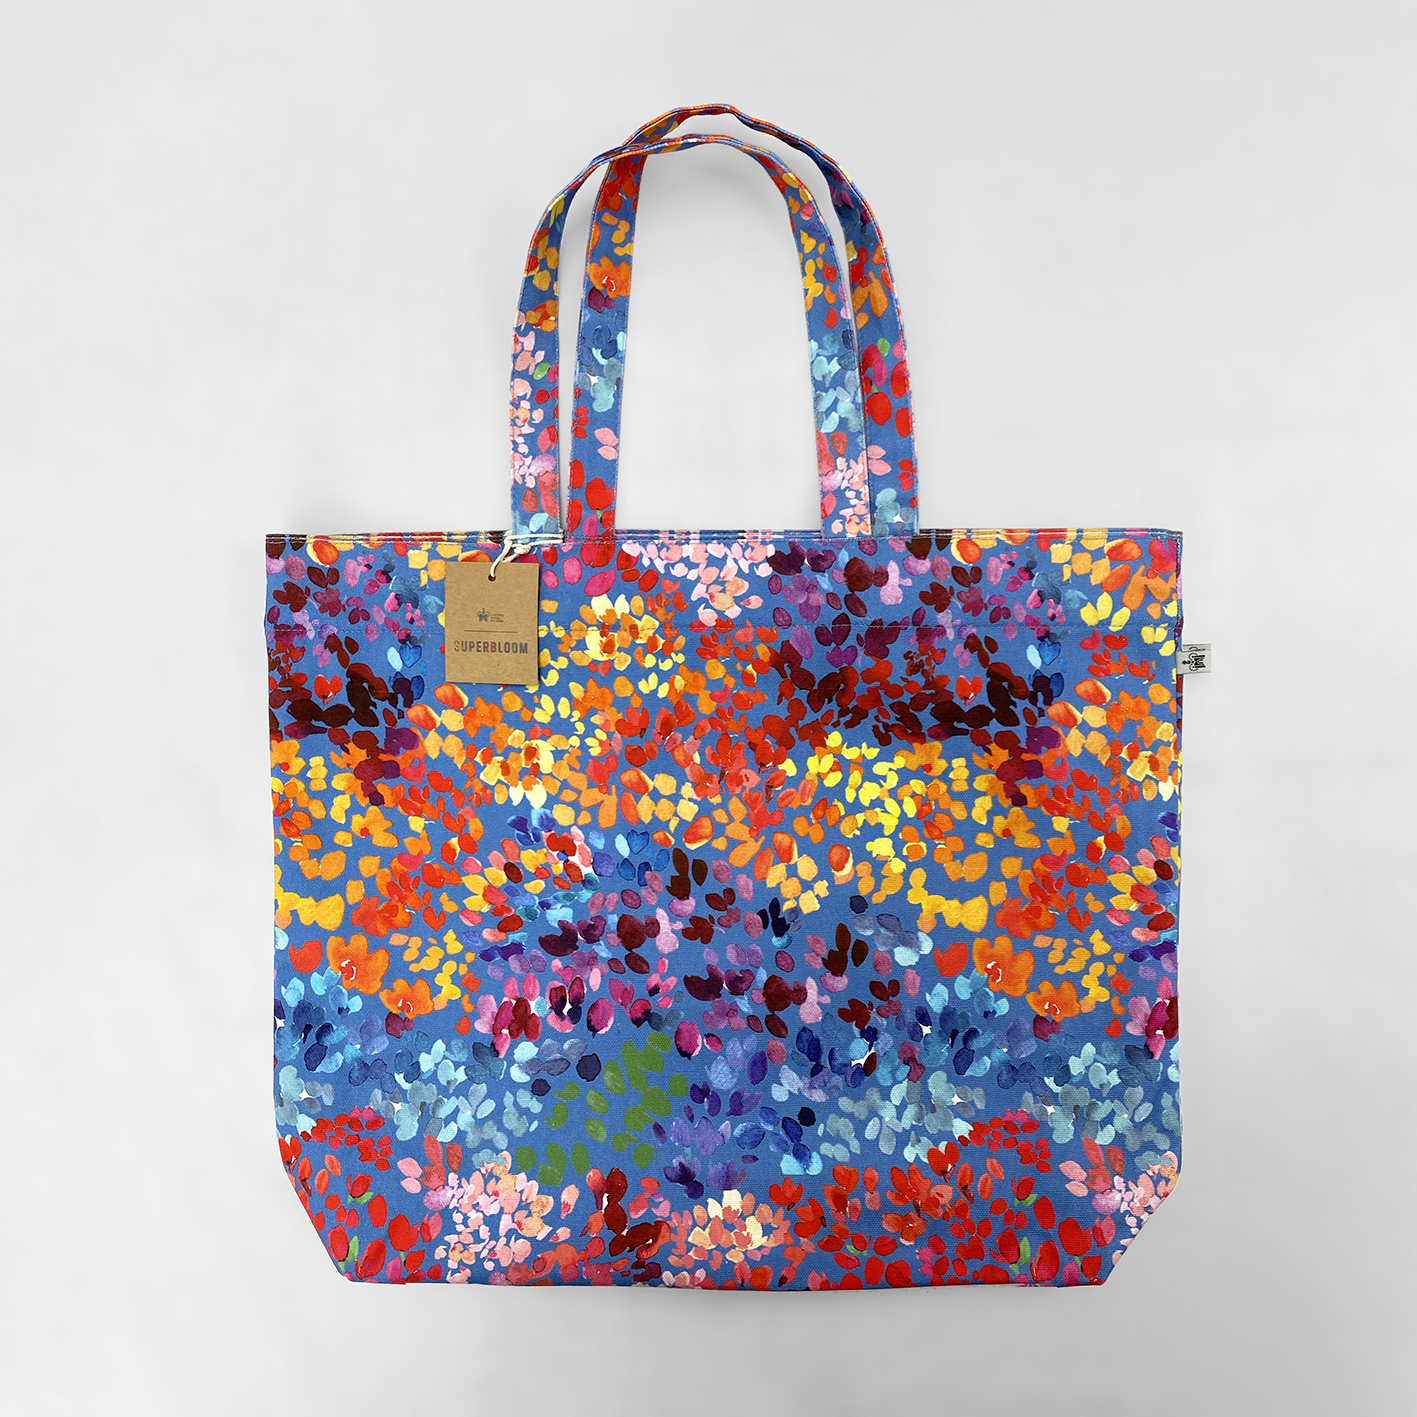 6 Digital printed large Tote Bag for Historic Royal Palaces and the Super bloom at the tower on london png